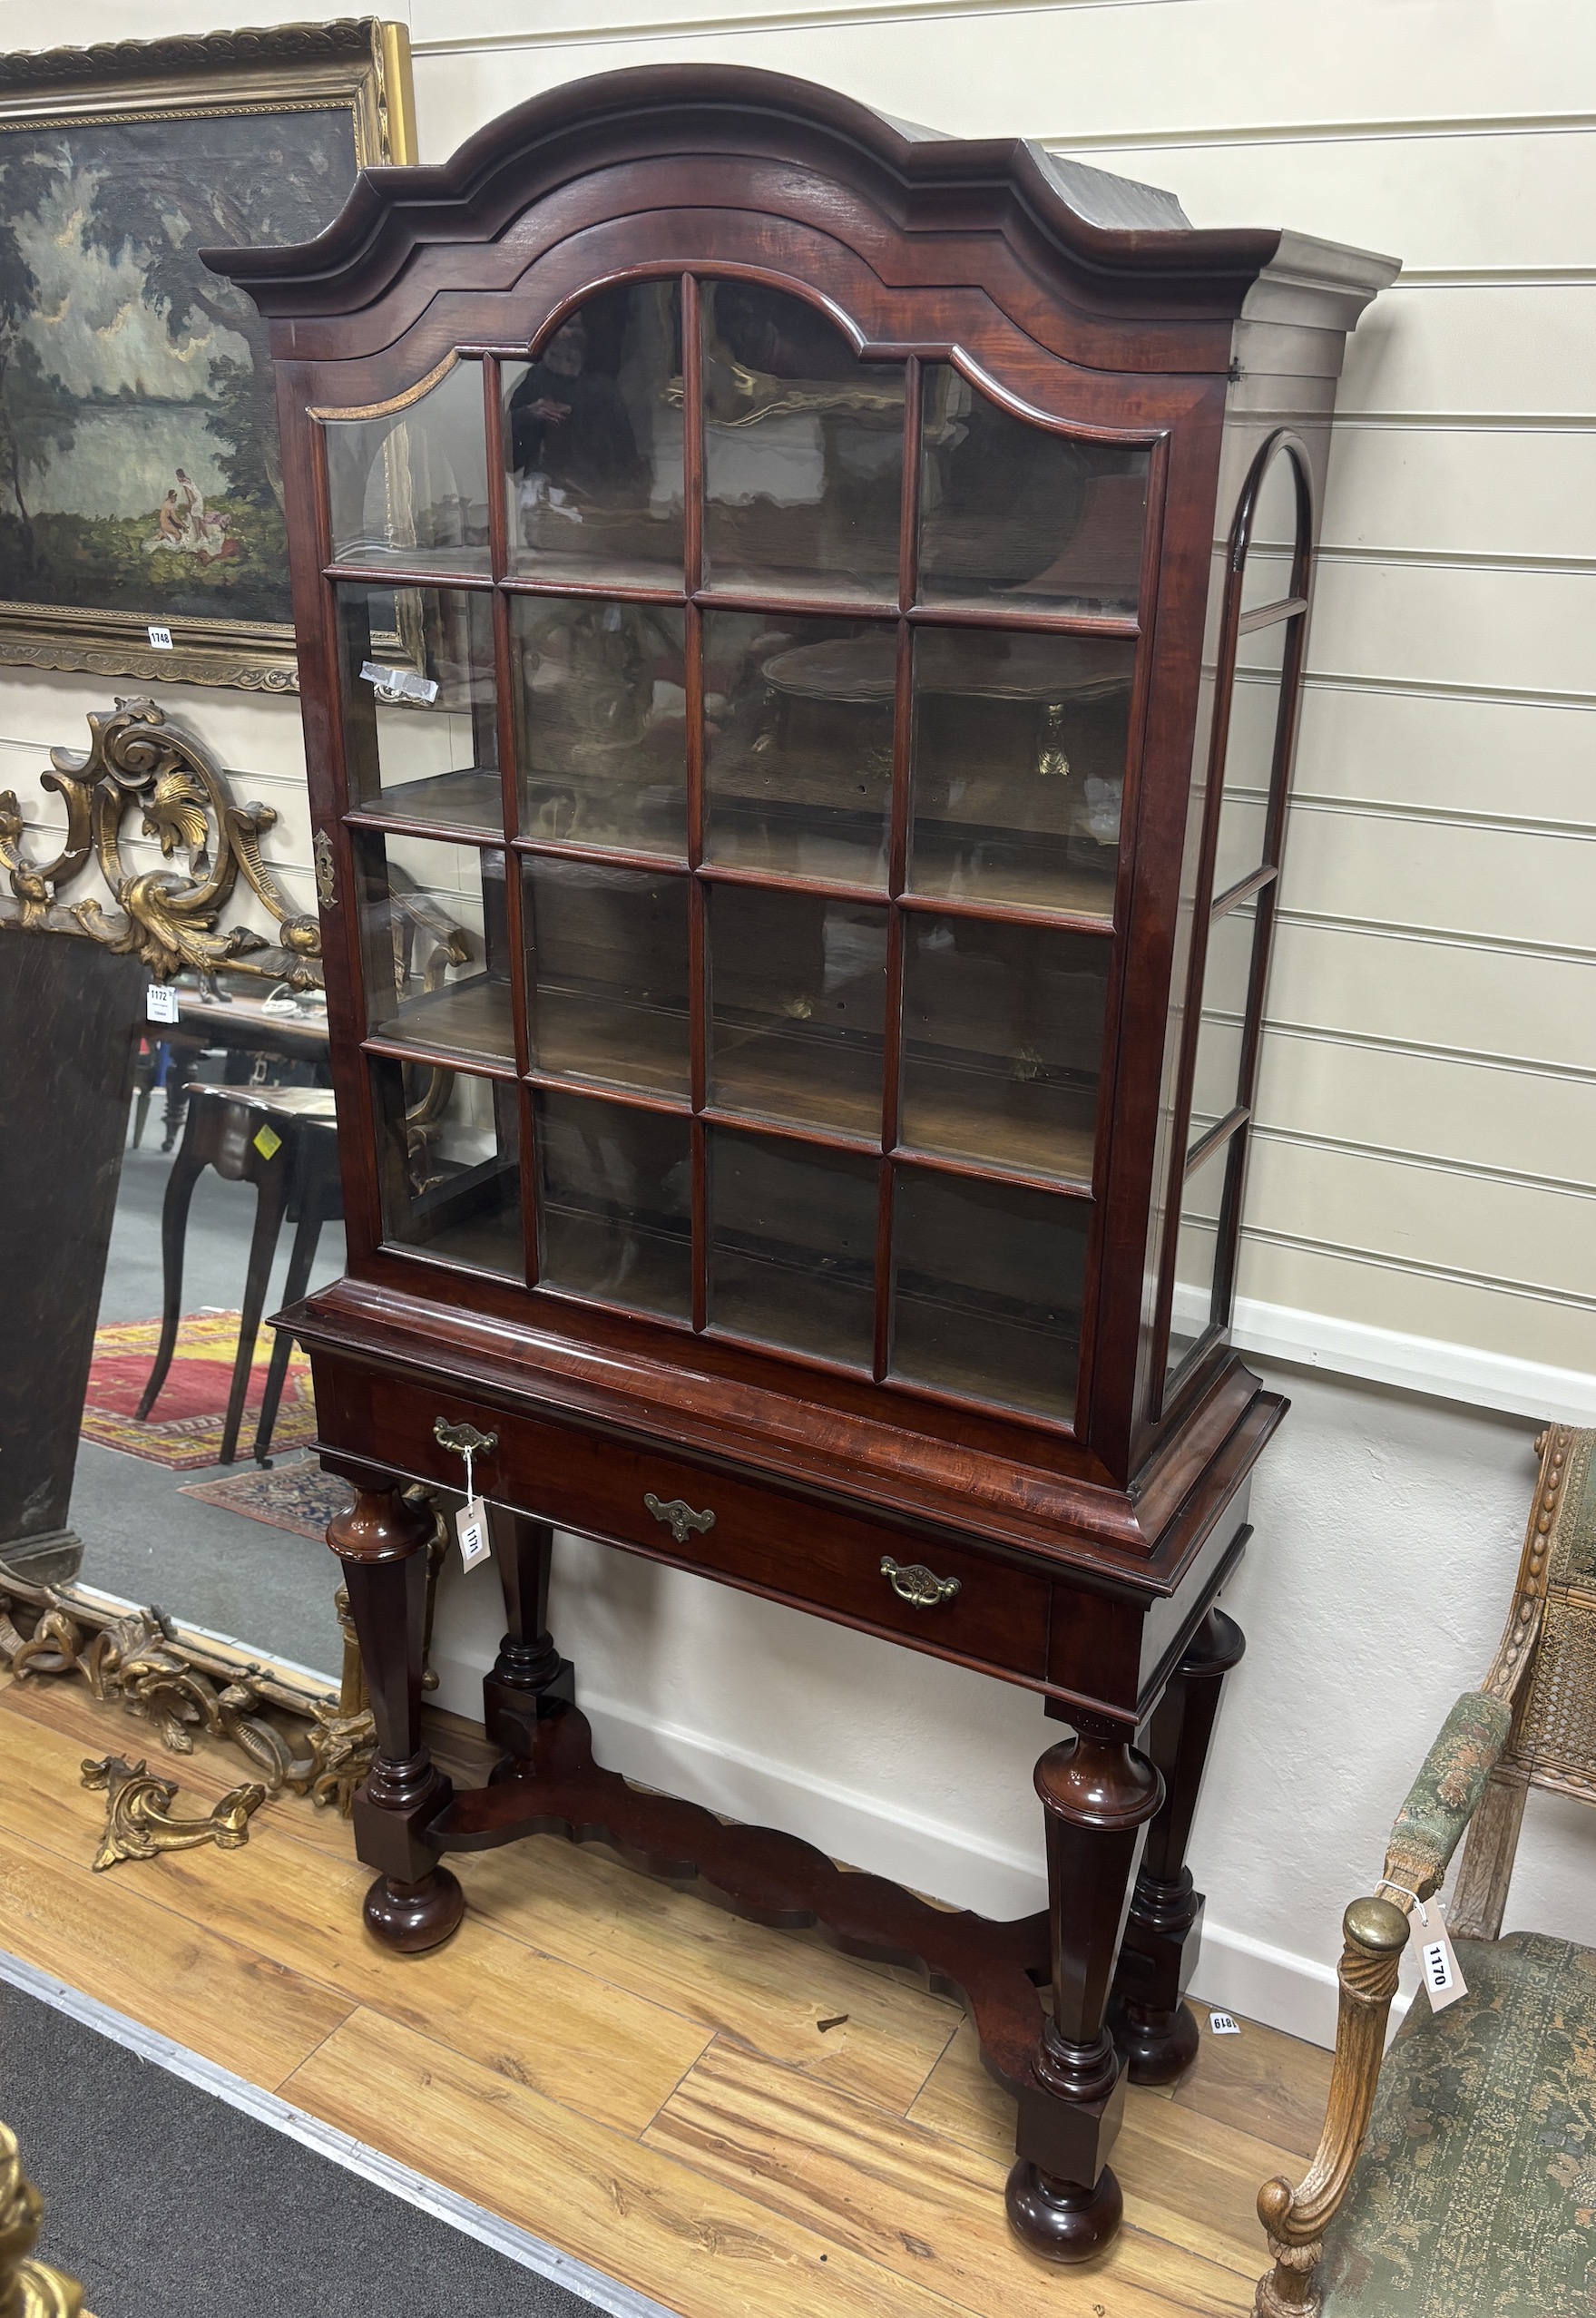 An early 20th century Dutch mahogany display cabinet on stand, width 93cm, depth 35cm, height 187cm